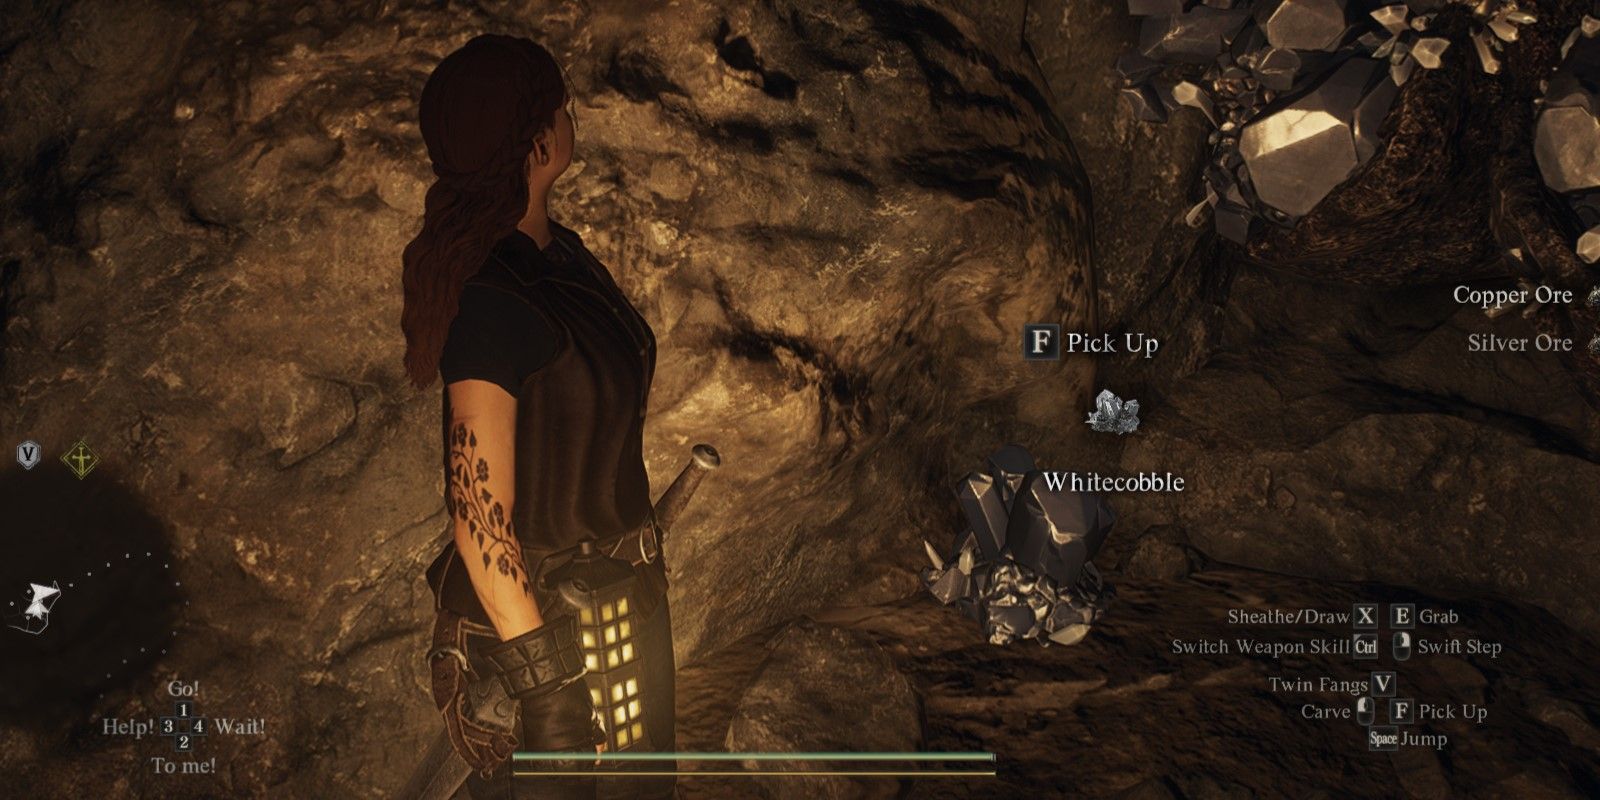 The Dragon's Dogma 2 character is about to pick up some Whitecobble, a rare ore.